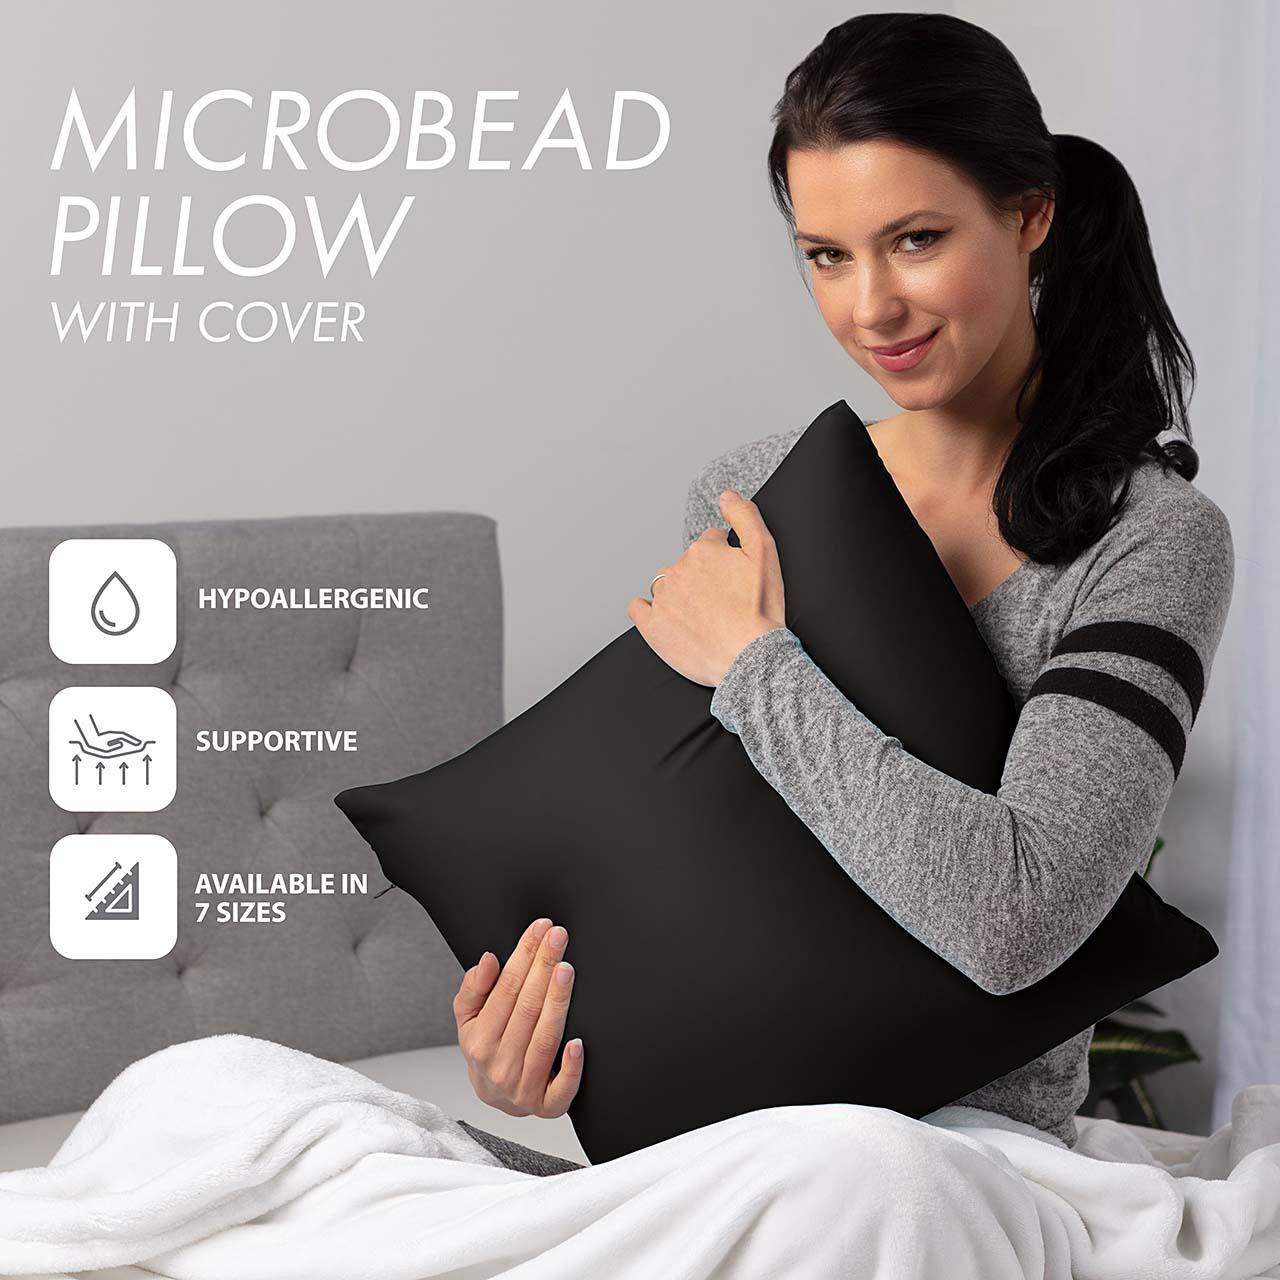 The Microbead Pillow Will Ruin Us All (Comfortably)